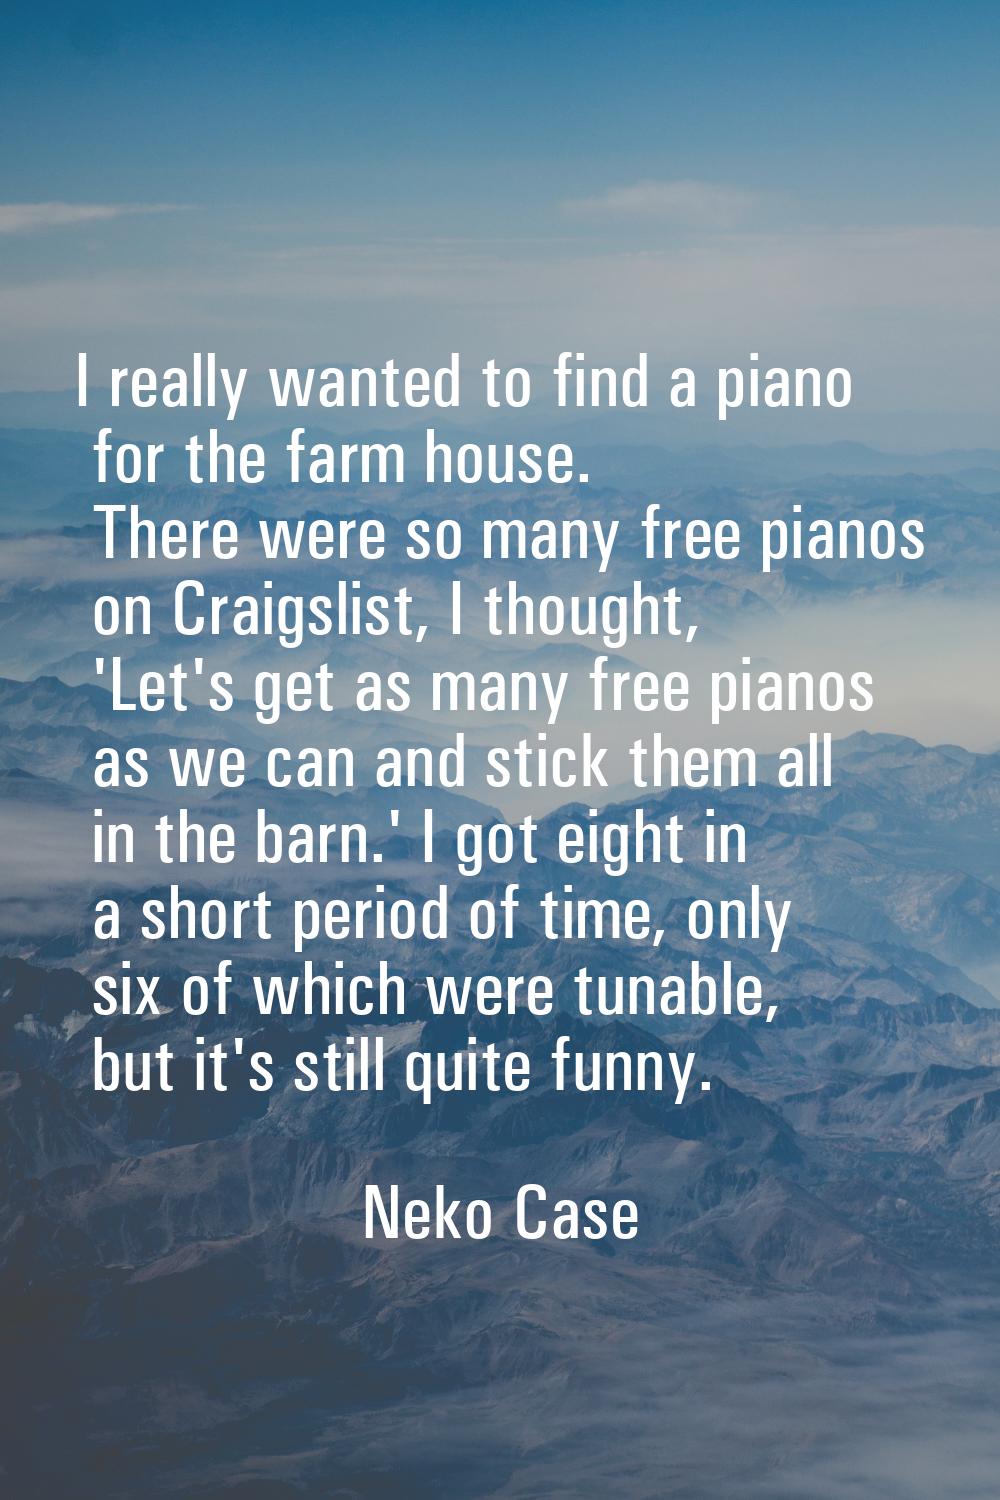 I really wanted to find a piano for the farm house. There were so many free pianos on Craigslist, I